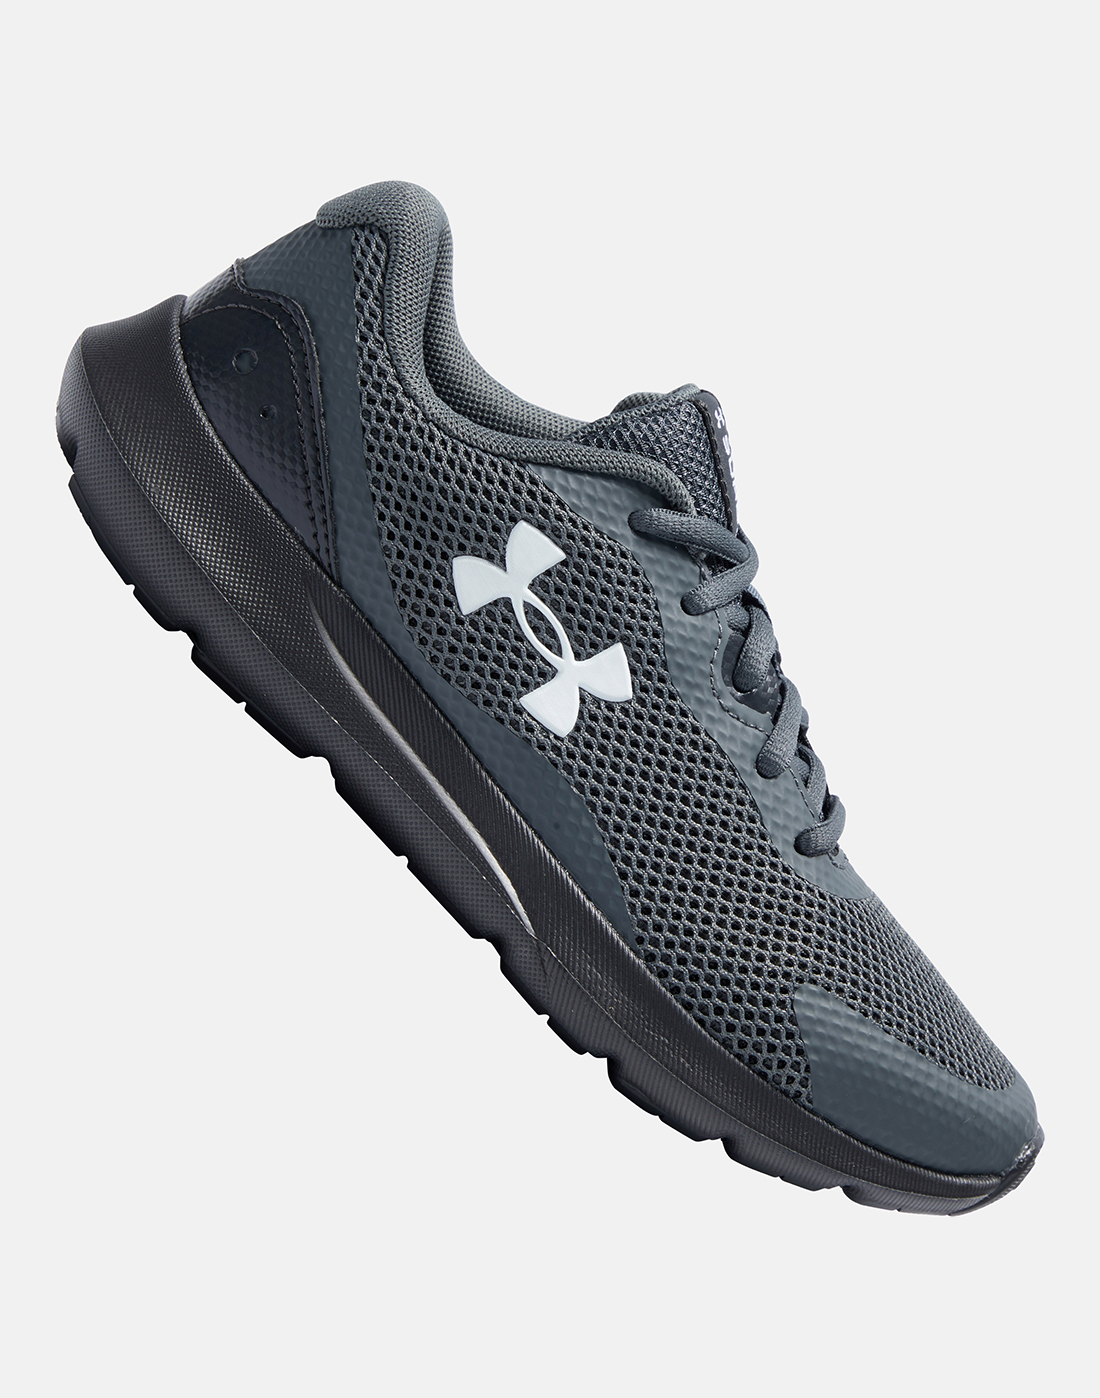 Under Armour Surge 3 - Grey | Life Style Sports IE